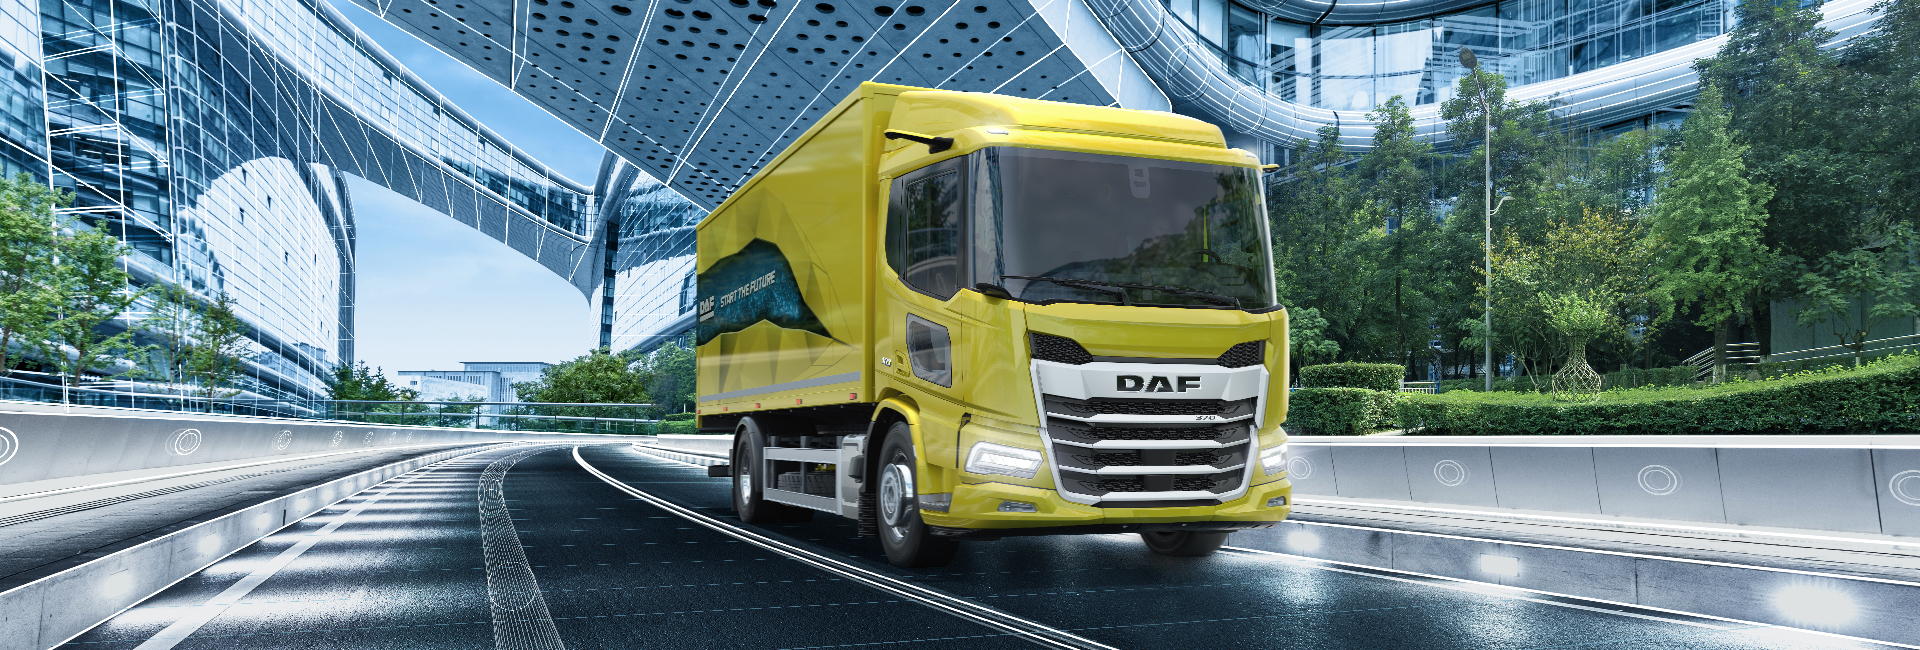 DAF is starting the future with New Generation XF, XG and XG⁺ - DAF  Countries